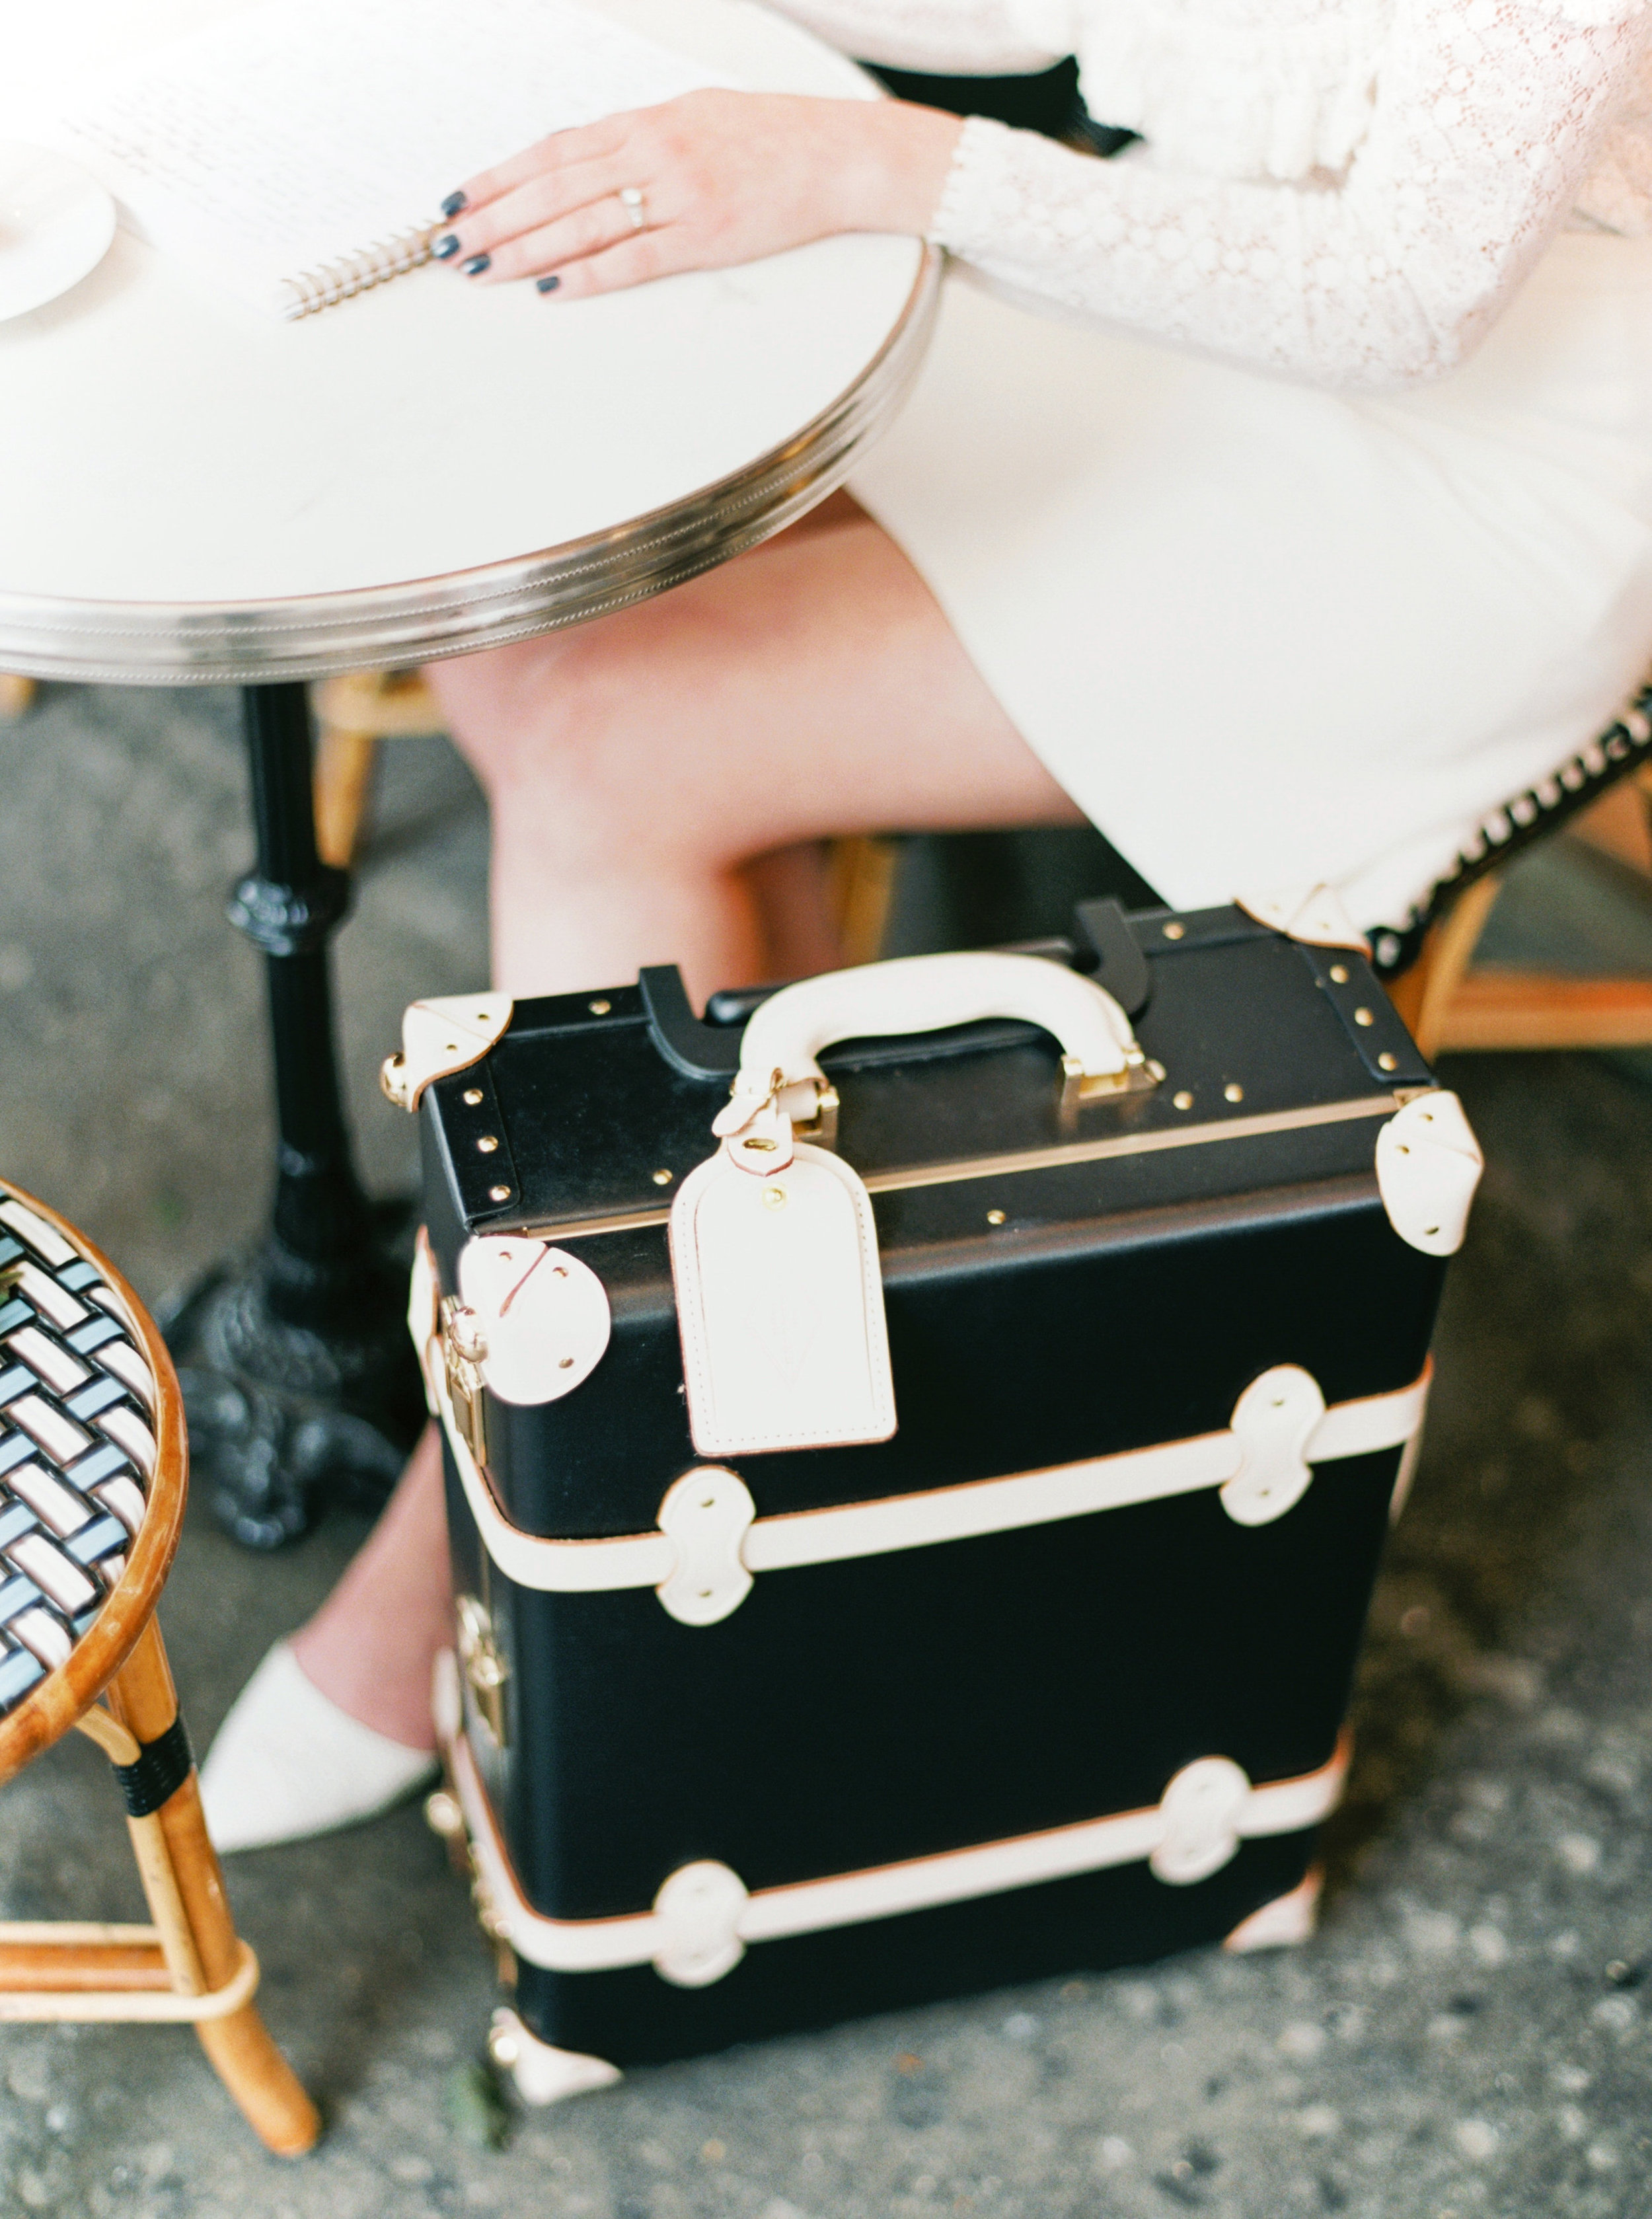 The Best Luggage for Traveling in Style | Chic suitcases for fashionable travel, with cute luggage sets and the prettiest suitcase options online. | Because luggage with personality is always more fun than another black roller bag!